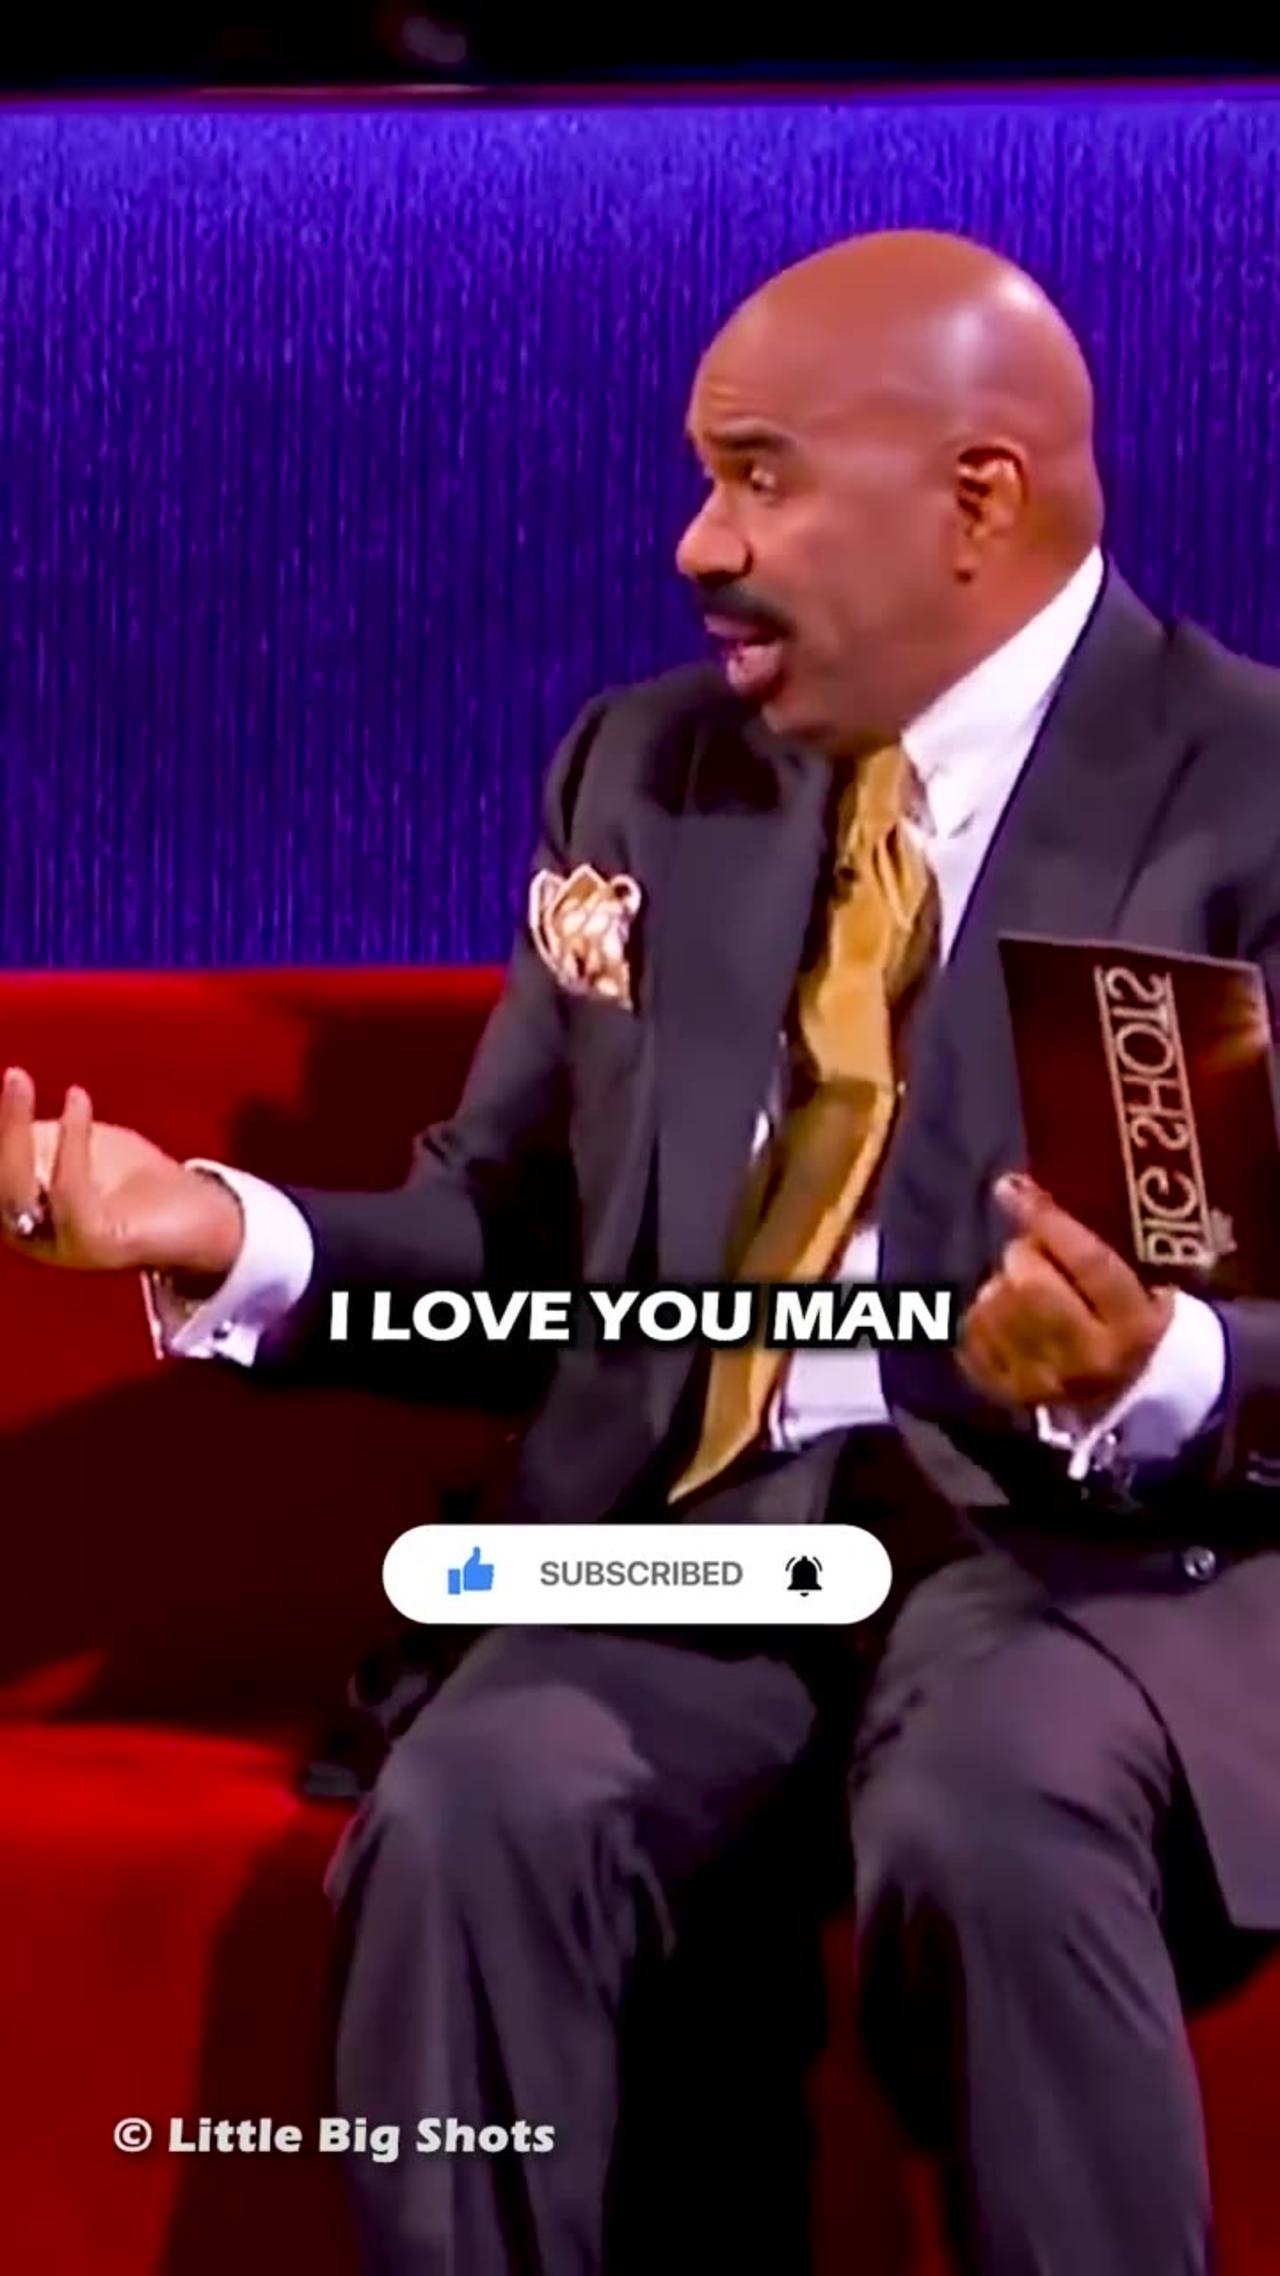 The Cutest Moment Ever Steve Harvey's Chat with Three Year Old Boy!